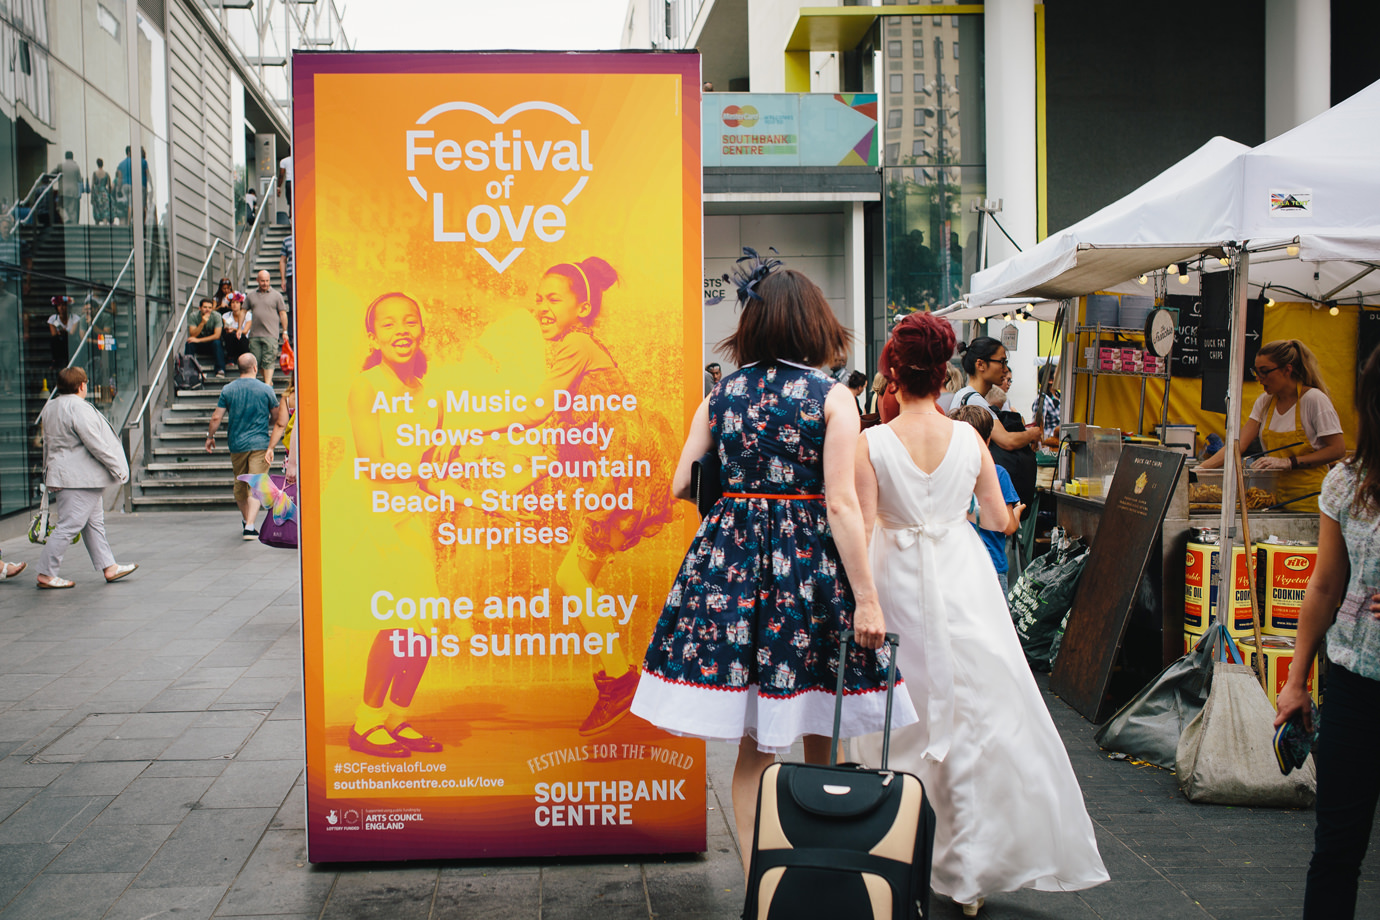 Festival of Love, Southbank, documentary wedding photography